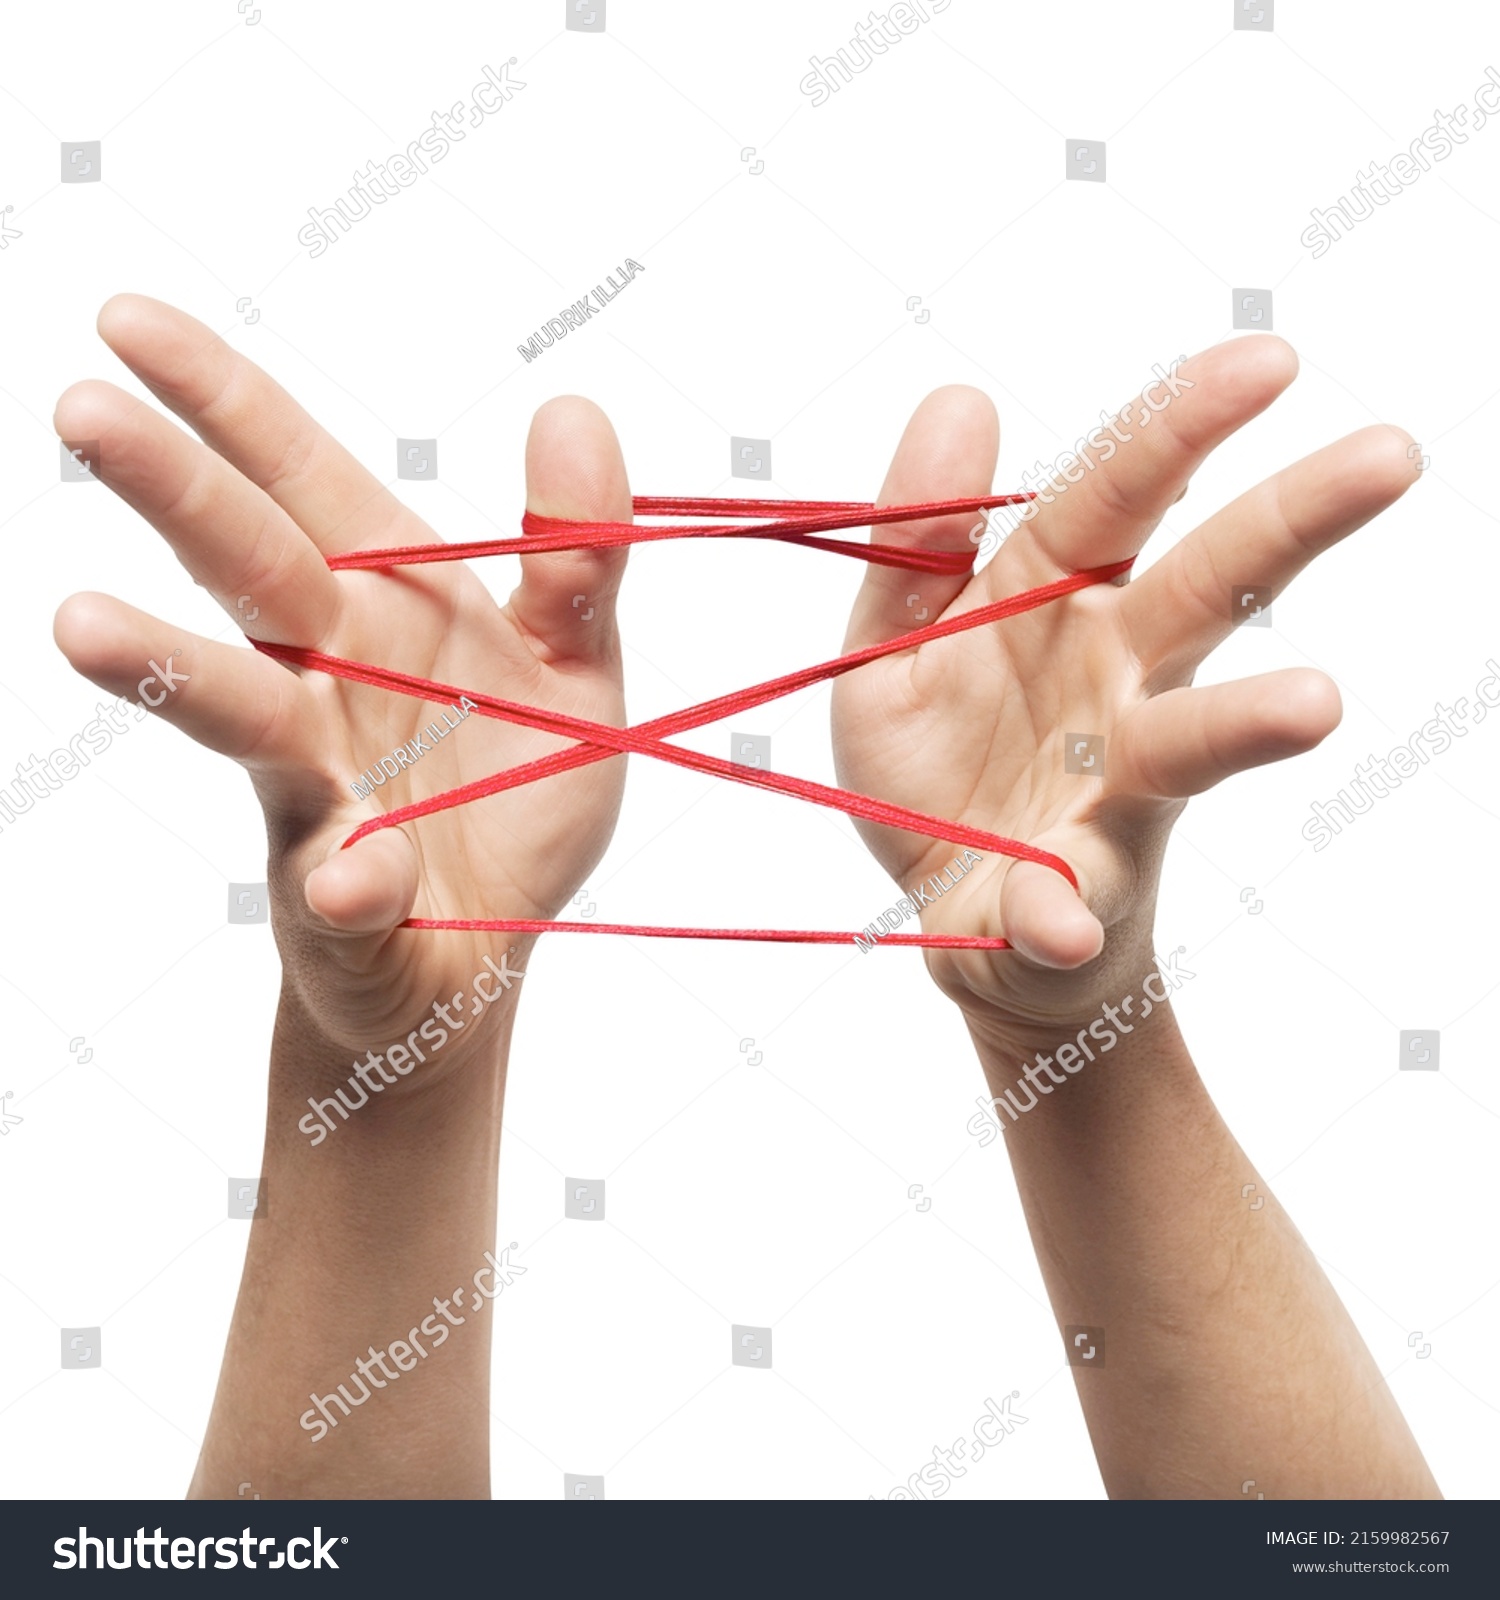 Man's hand holding a thread on a white background, isolated #2159982567